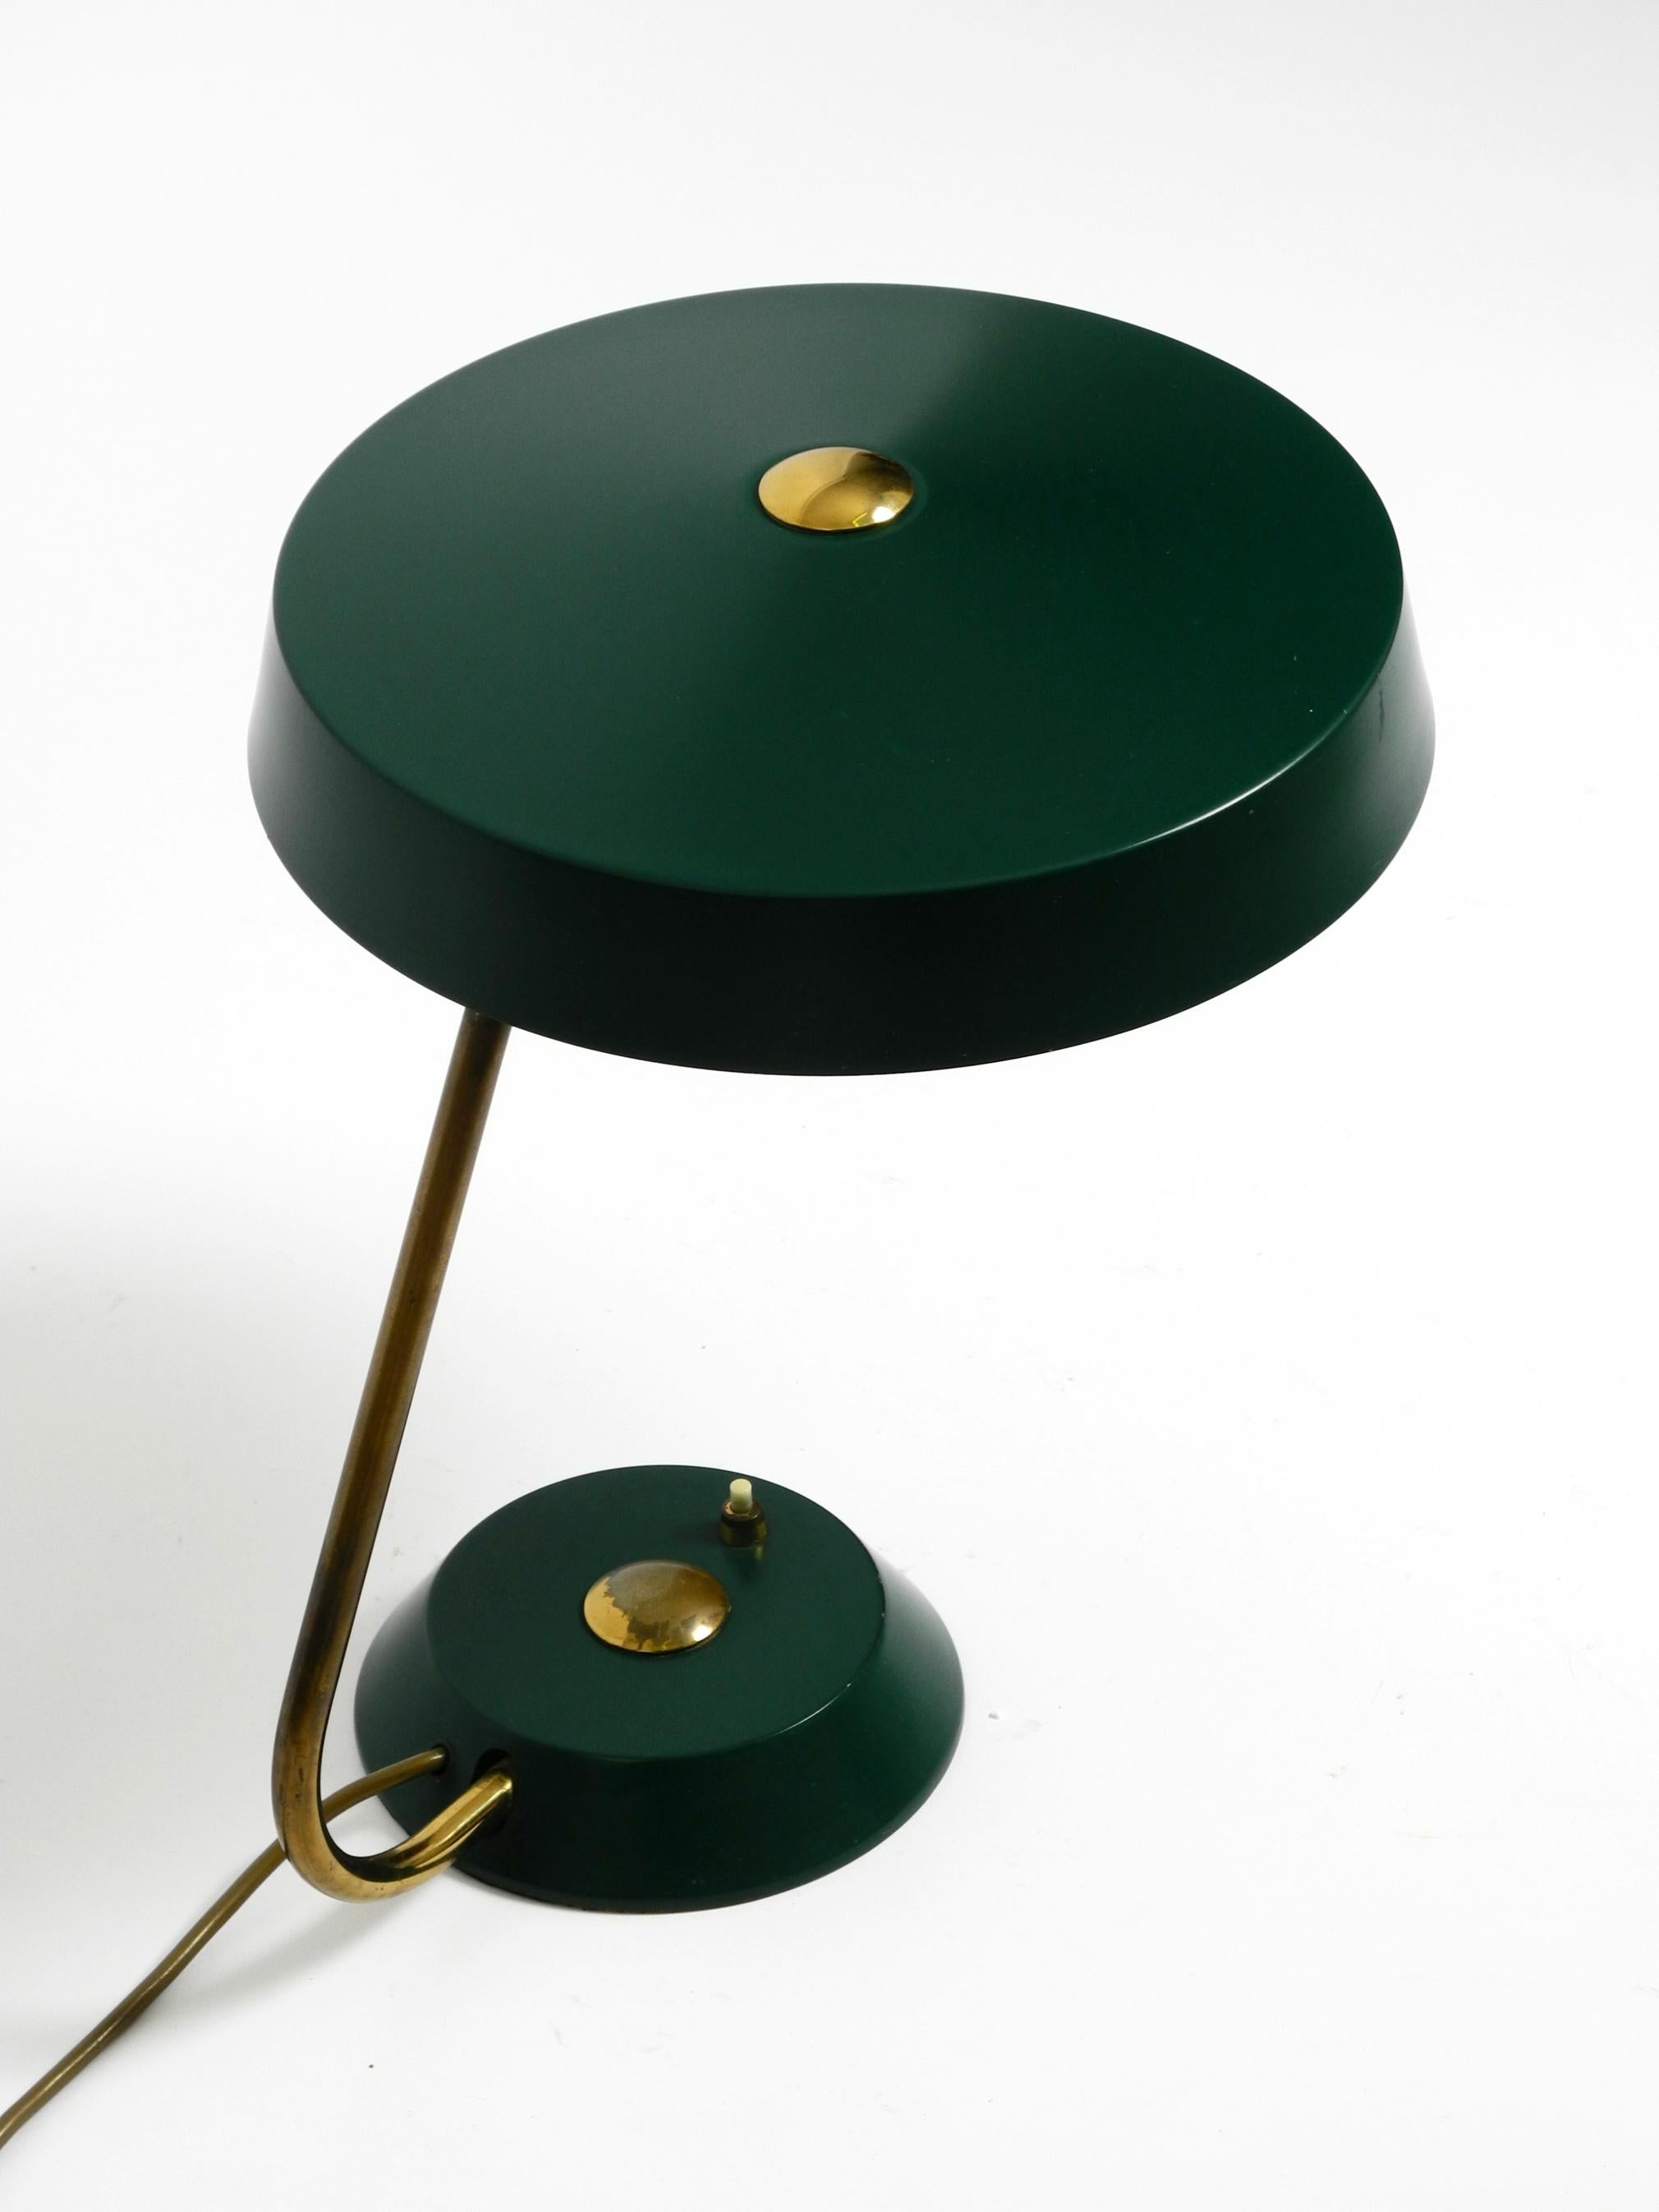 Large heavy Mid Century metal table lamp in British Green in dreamlike condition For Sale 8